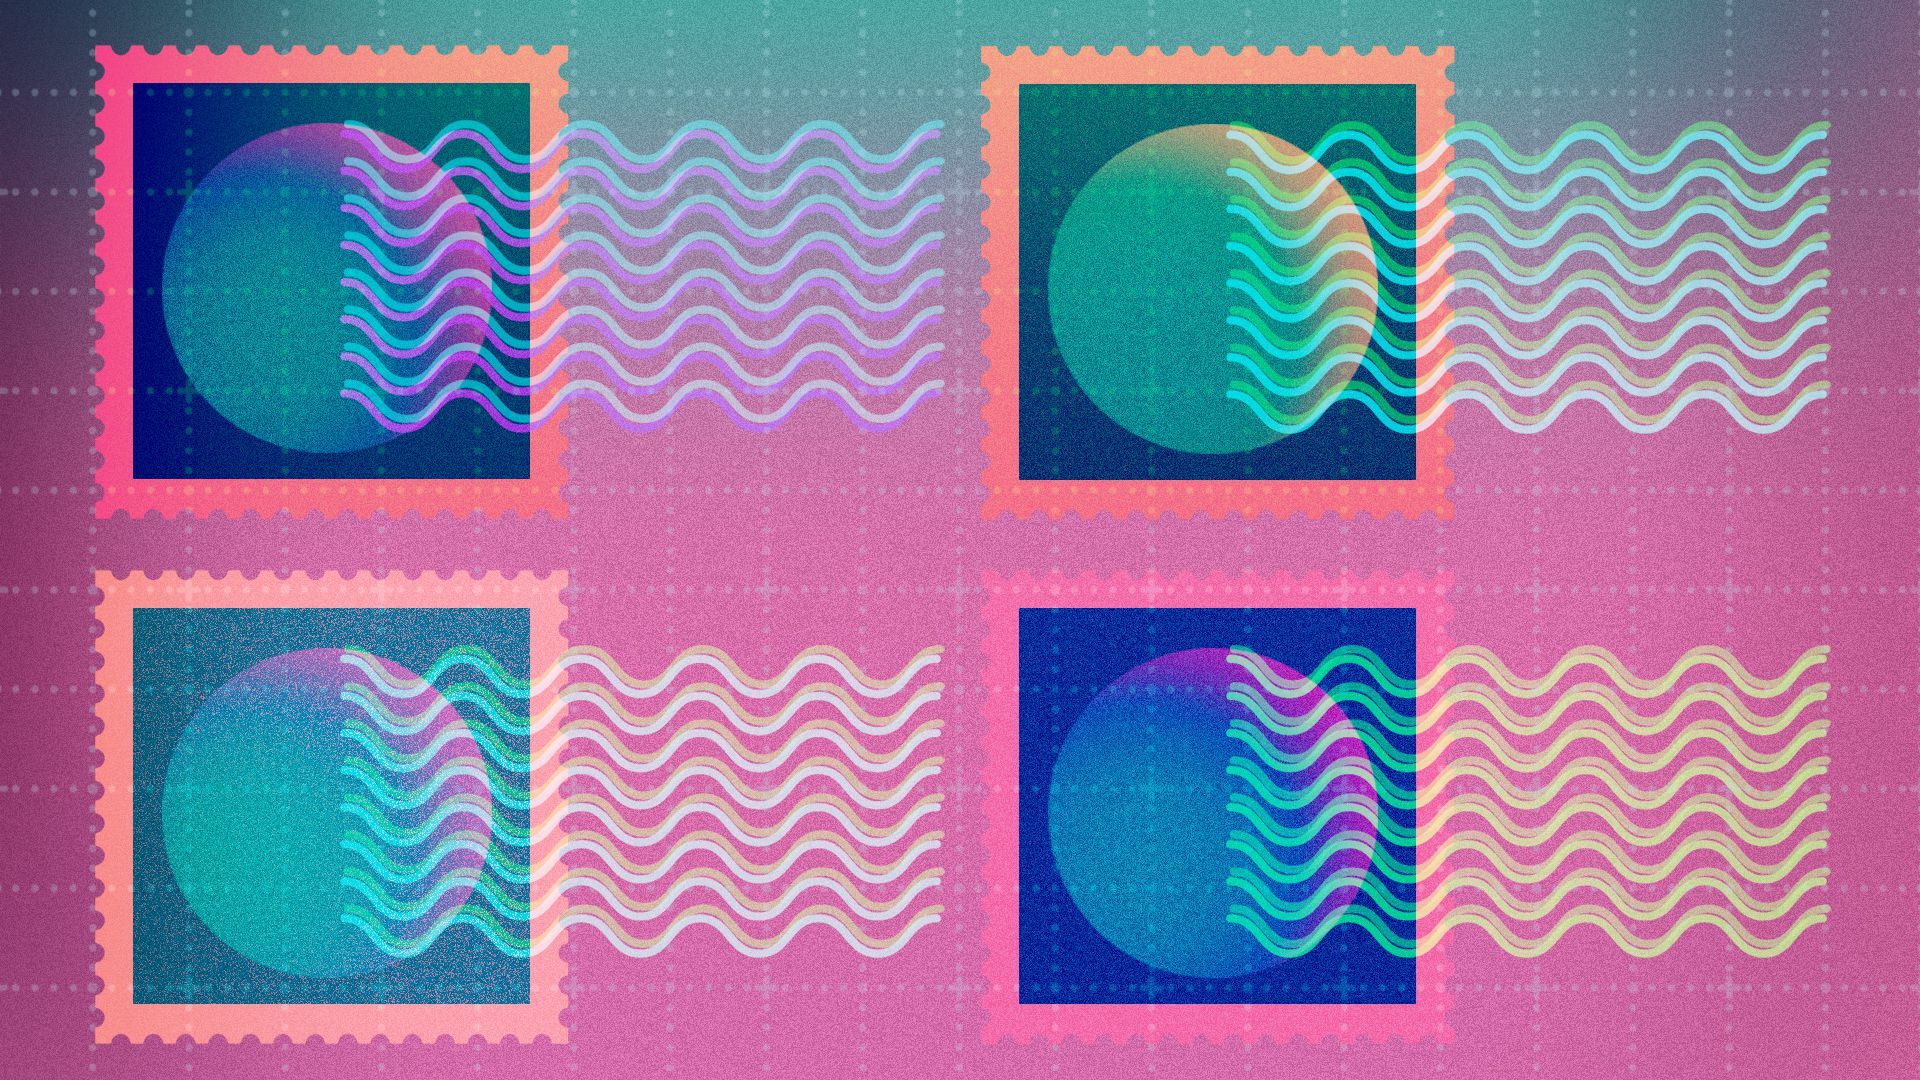 Illustration of different colored postage stamps with circles on them on a grid